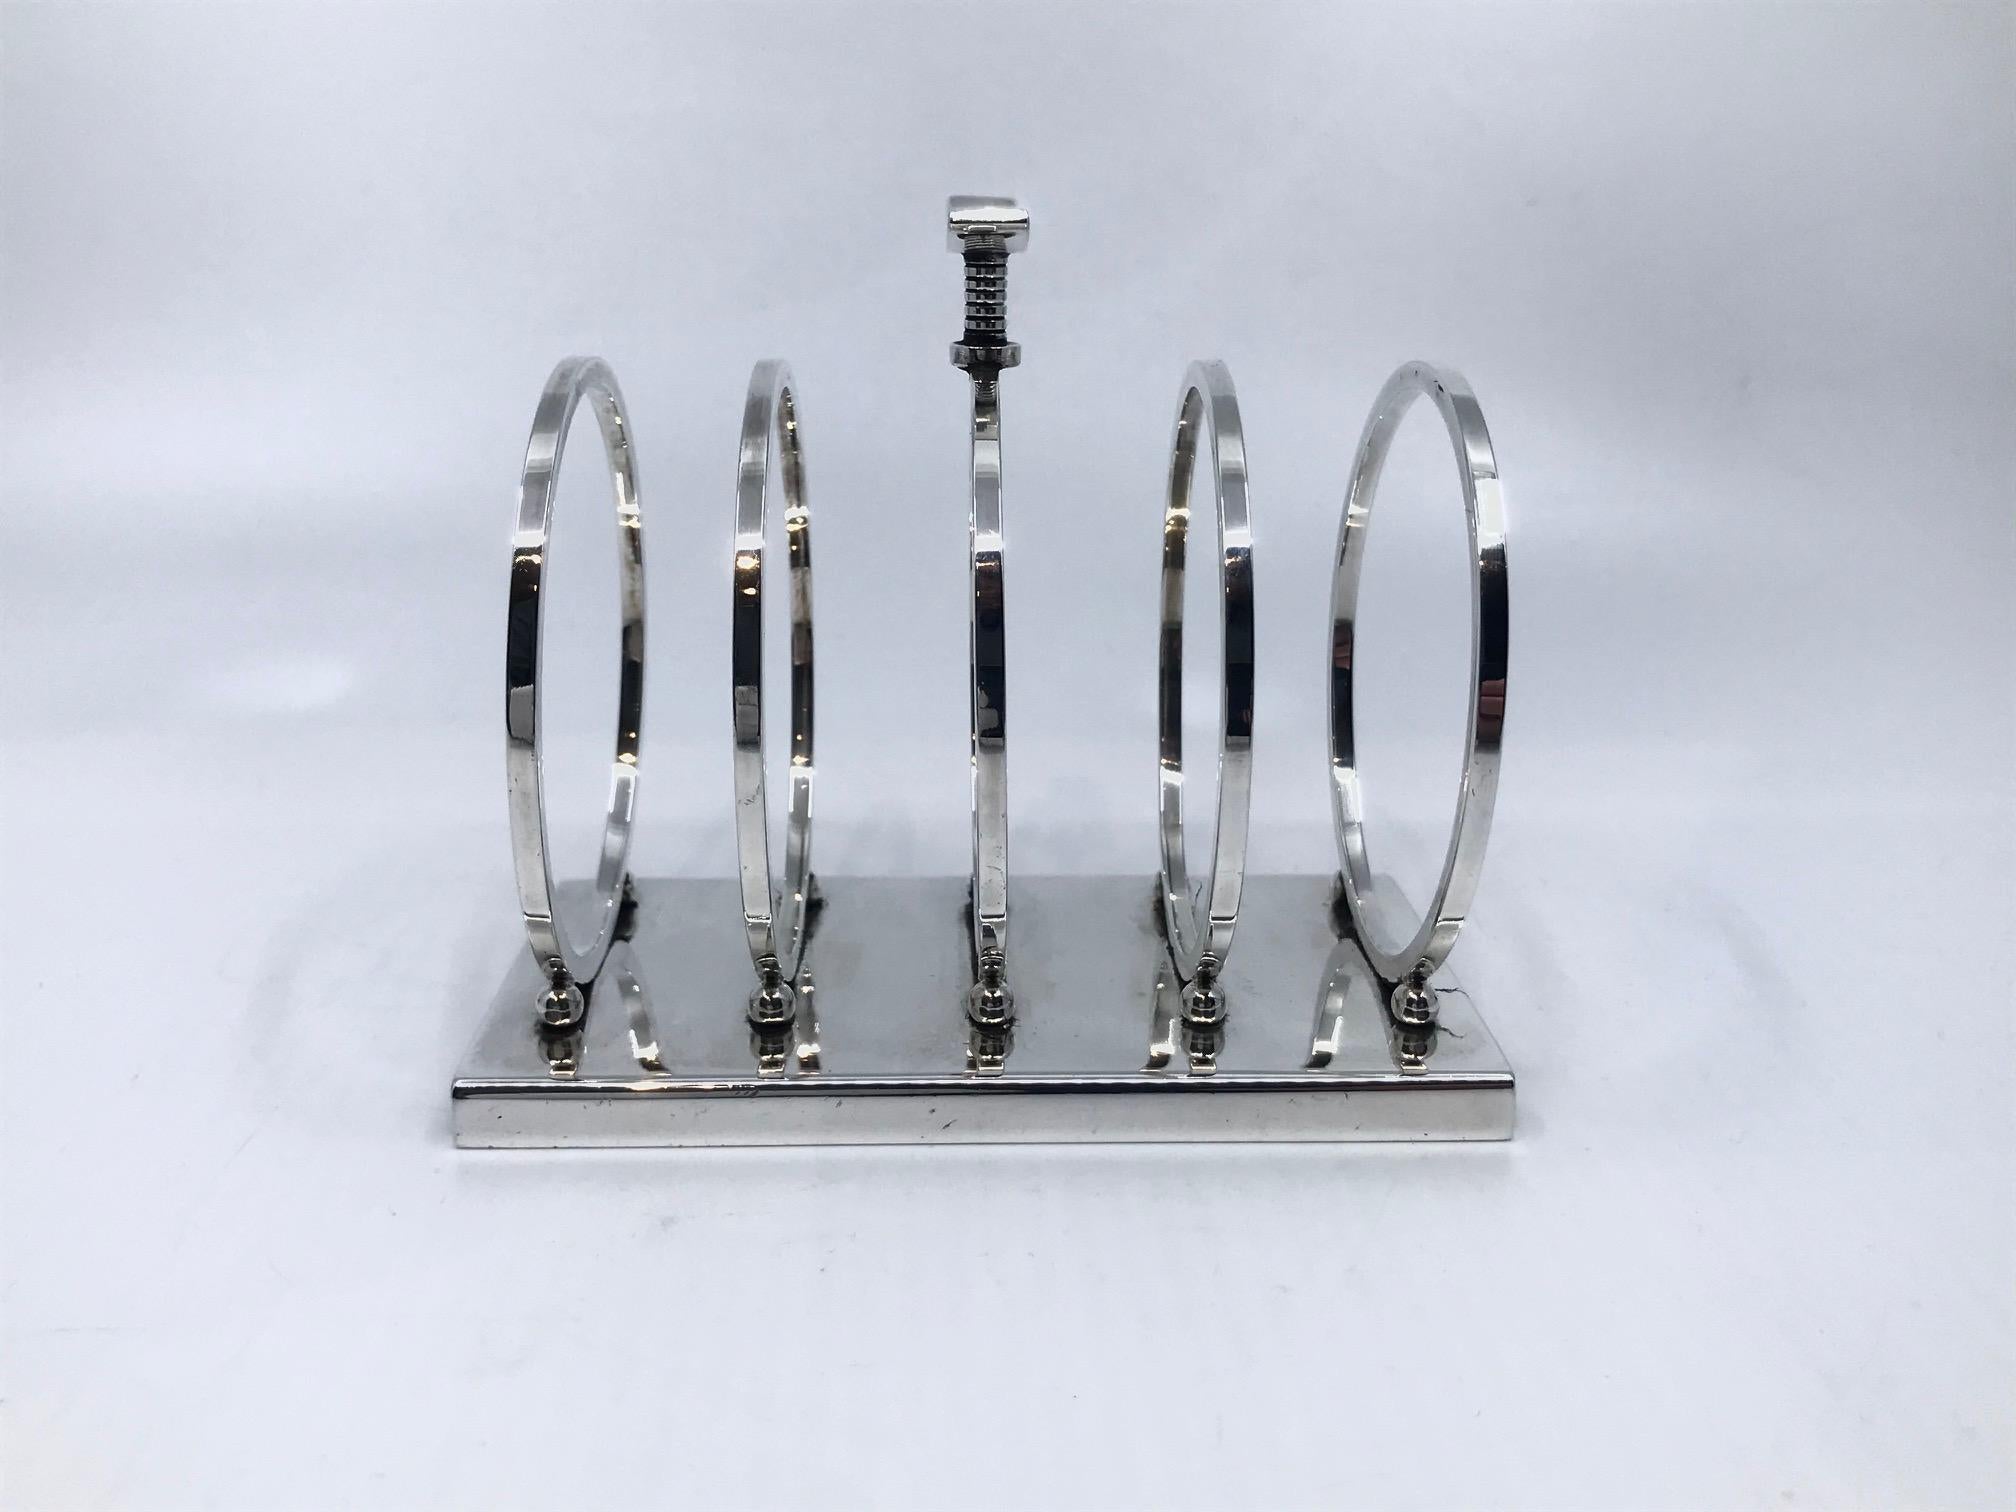 This is a rare sterling silver Georg Jensen toast rack, design #824 by Sigvard Bernadotte from circa 1937. Light, elegant and functional design, the essence of Bernadotte’s design language.

Additional information:
Material: Sterling silver
Styles: